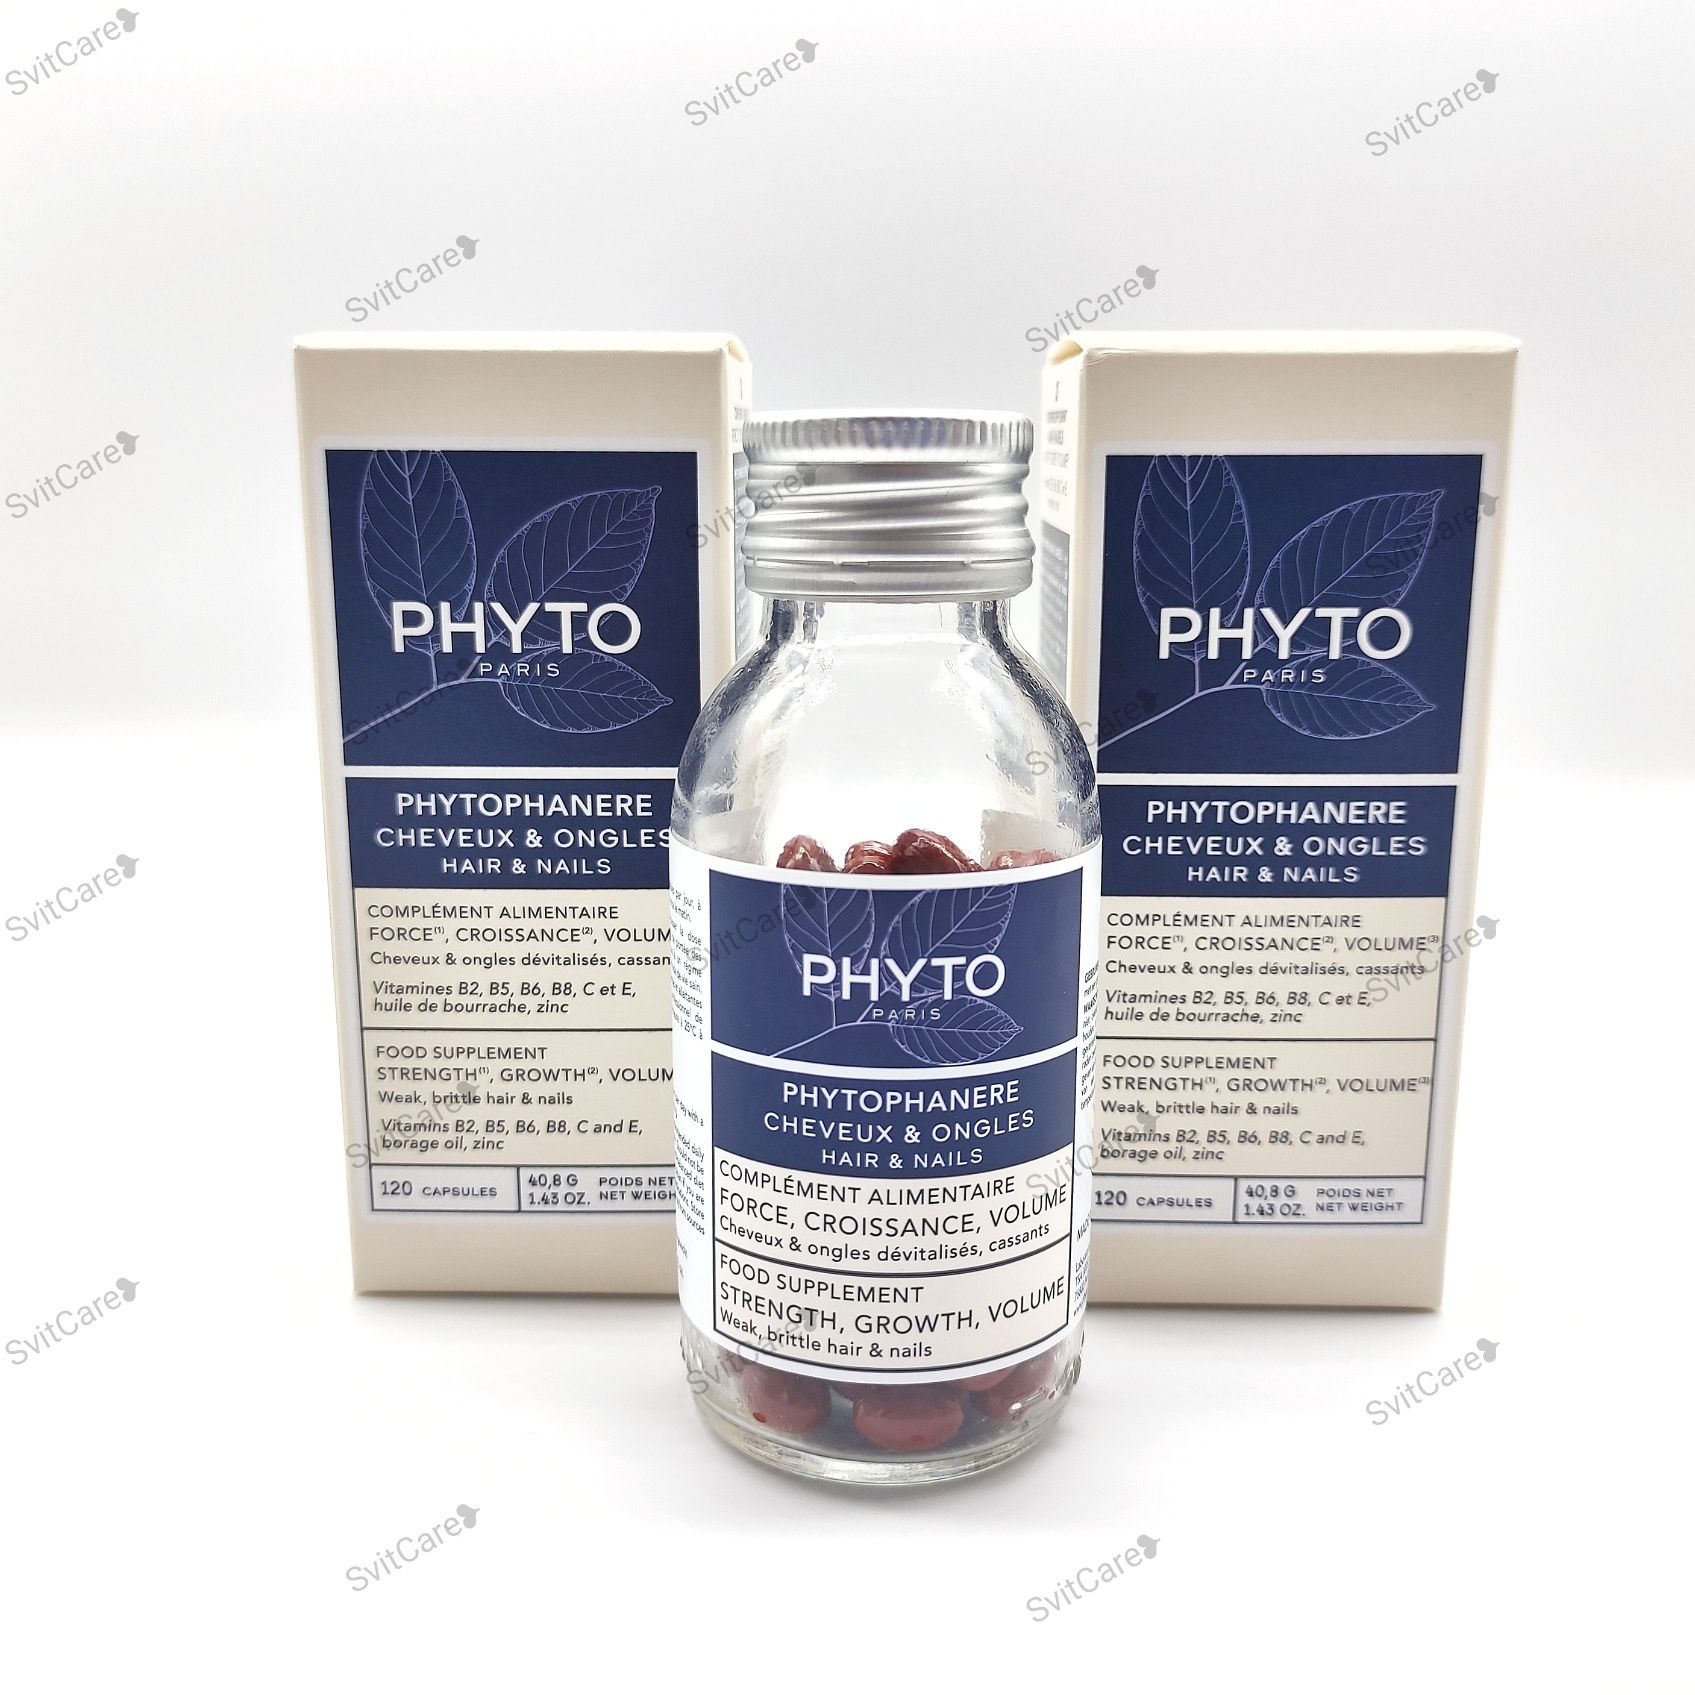 Phyto Phytophanere Hair And Nails вітаміни 120 капсул